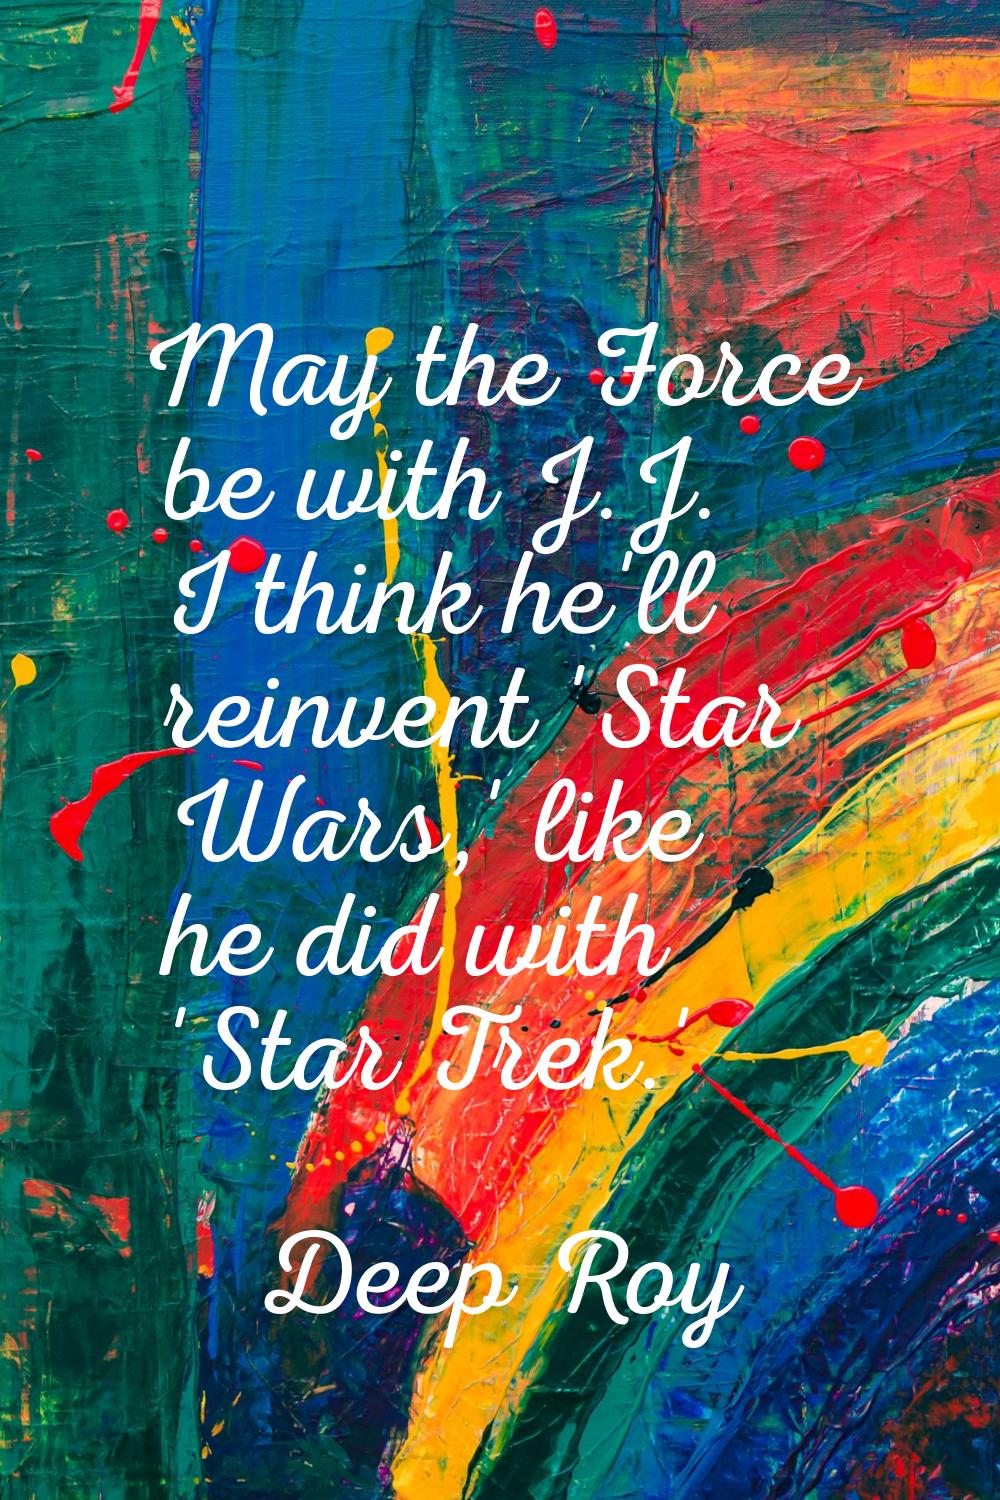 May the Force be with J.J. I think he'll reinvent 'Star Wars,' like he did with 'Star Trek.'